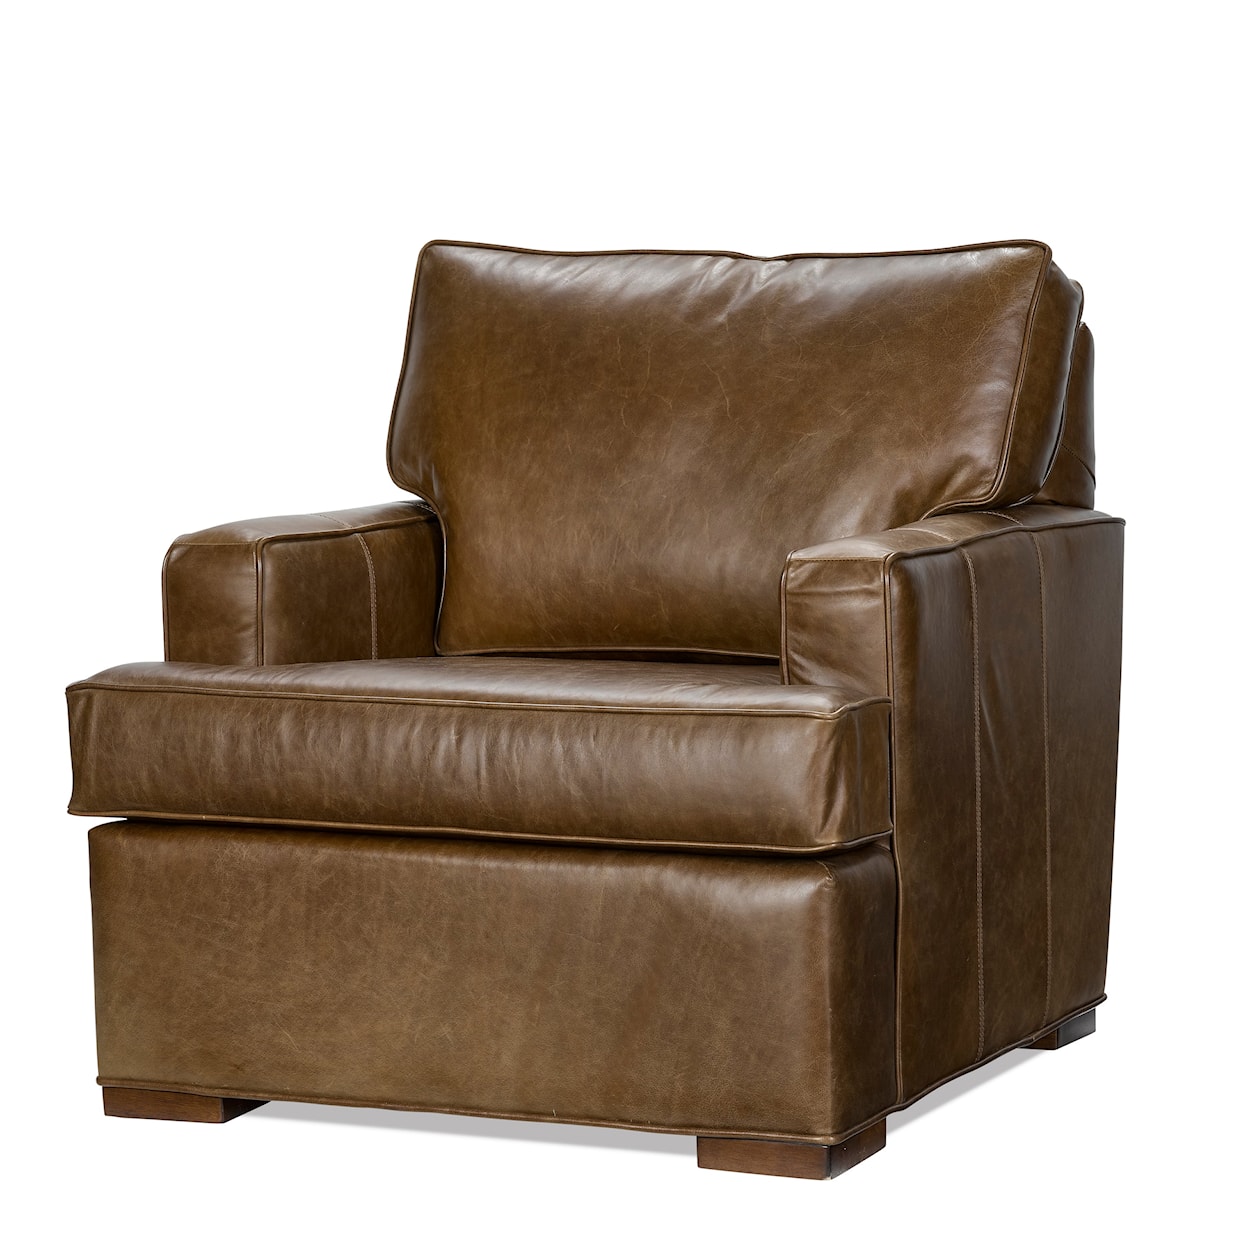 Lancer 3700 Leather Chair